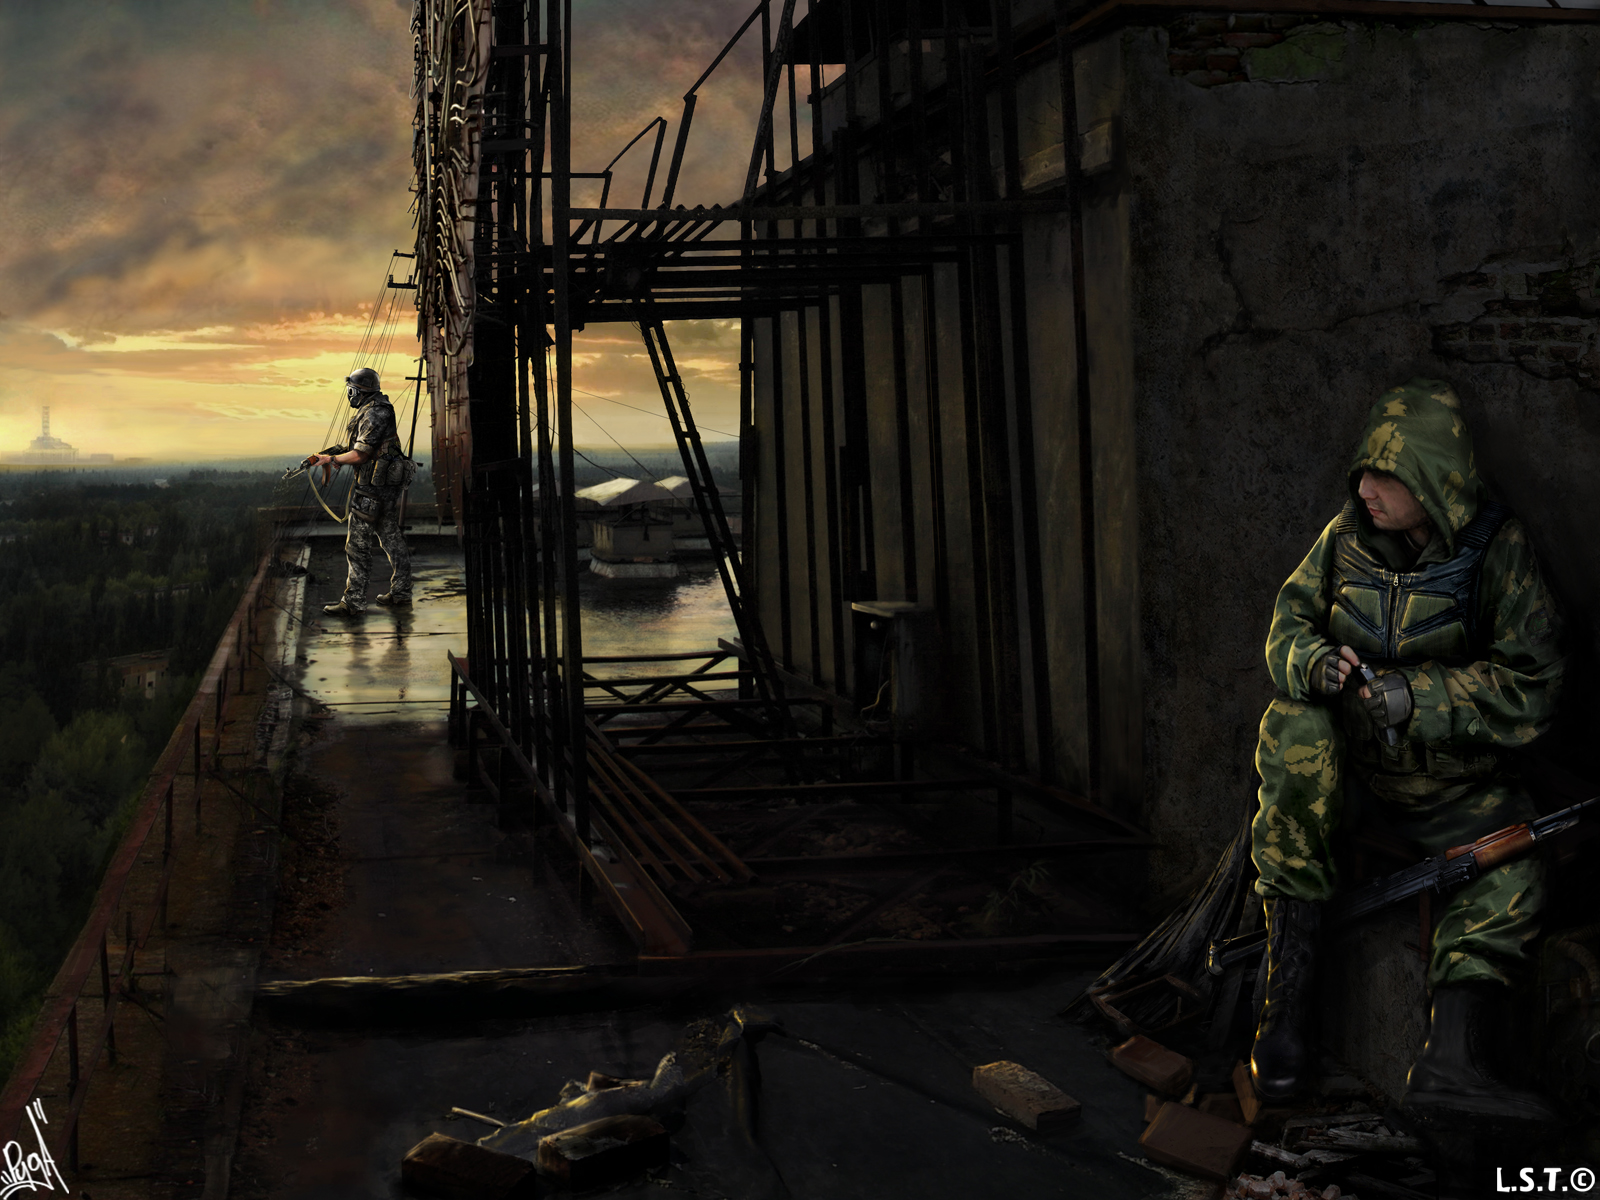 S.T.A.L.K.E.R., First person shooter, Atmosphere, Artwork, S.T.A.L.K.E.R.: Call of Pripyat, S.T.A.L.K.E.R.: Shadow of Chernobyl, S.T.A.L.K.E.R.: Clear Sky Wallpaper